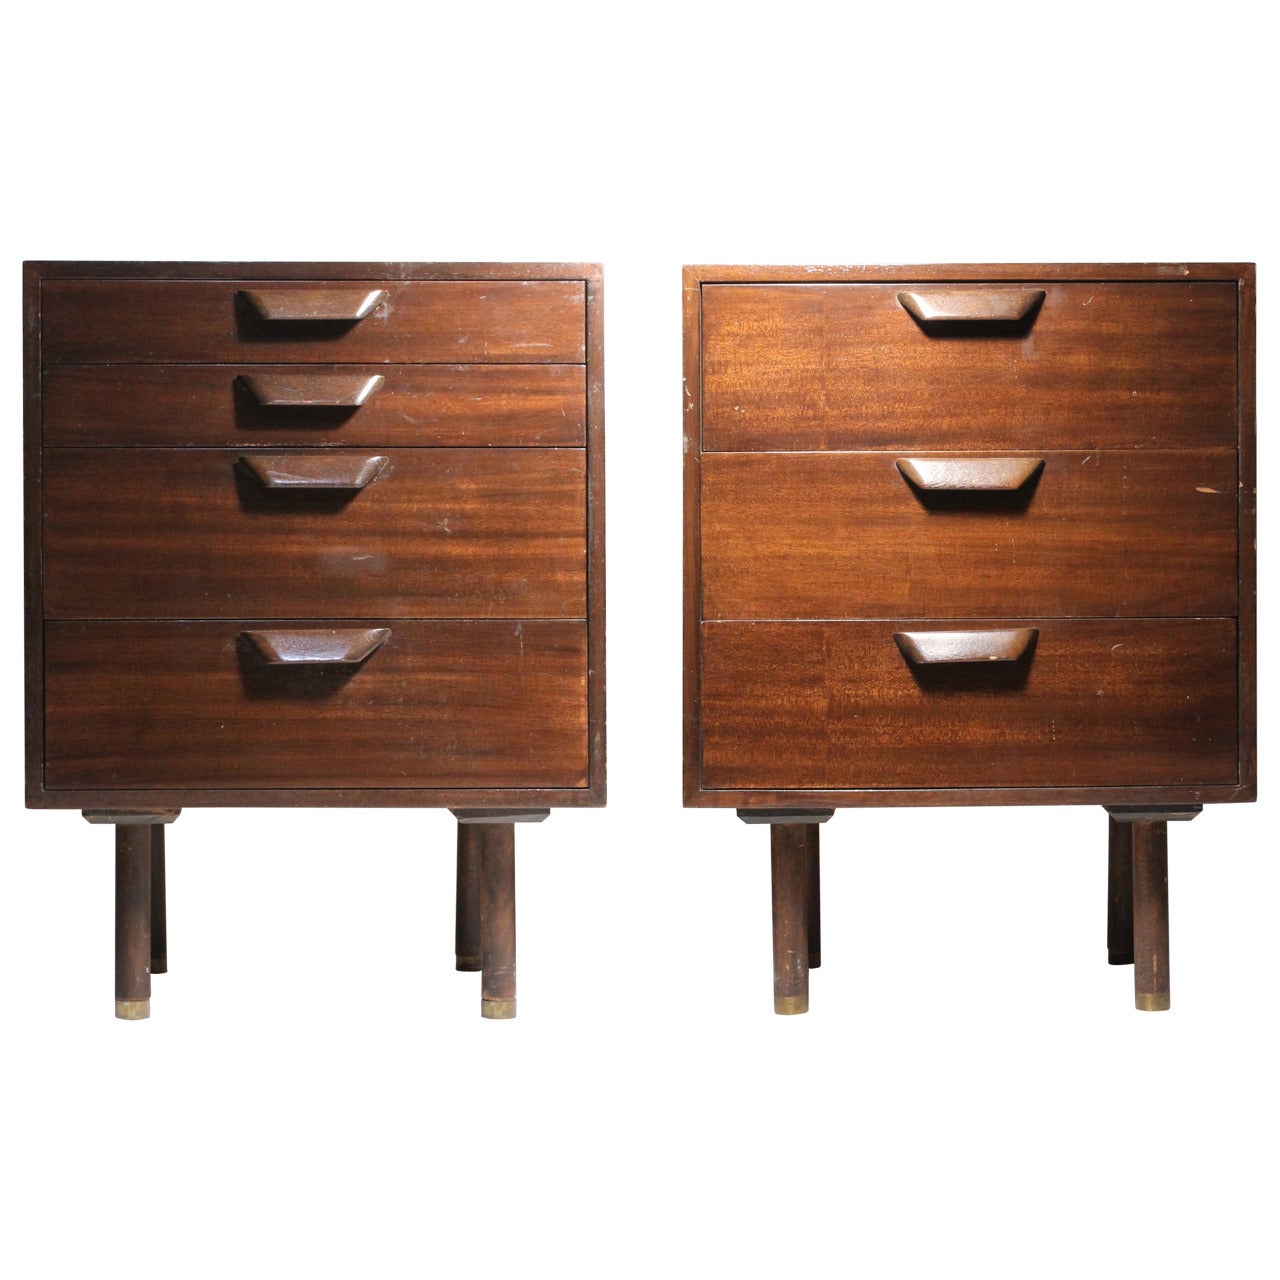 Pair of Harvey Probber Chests or Nightstands in style of Edward Wormley Dunbar